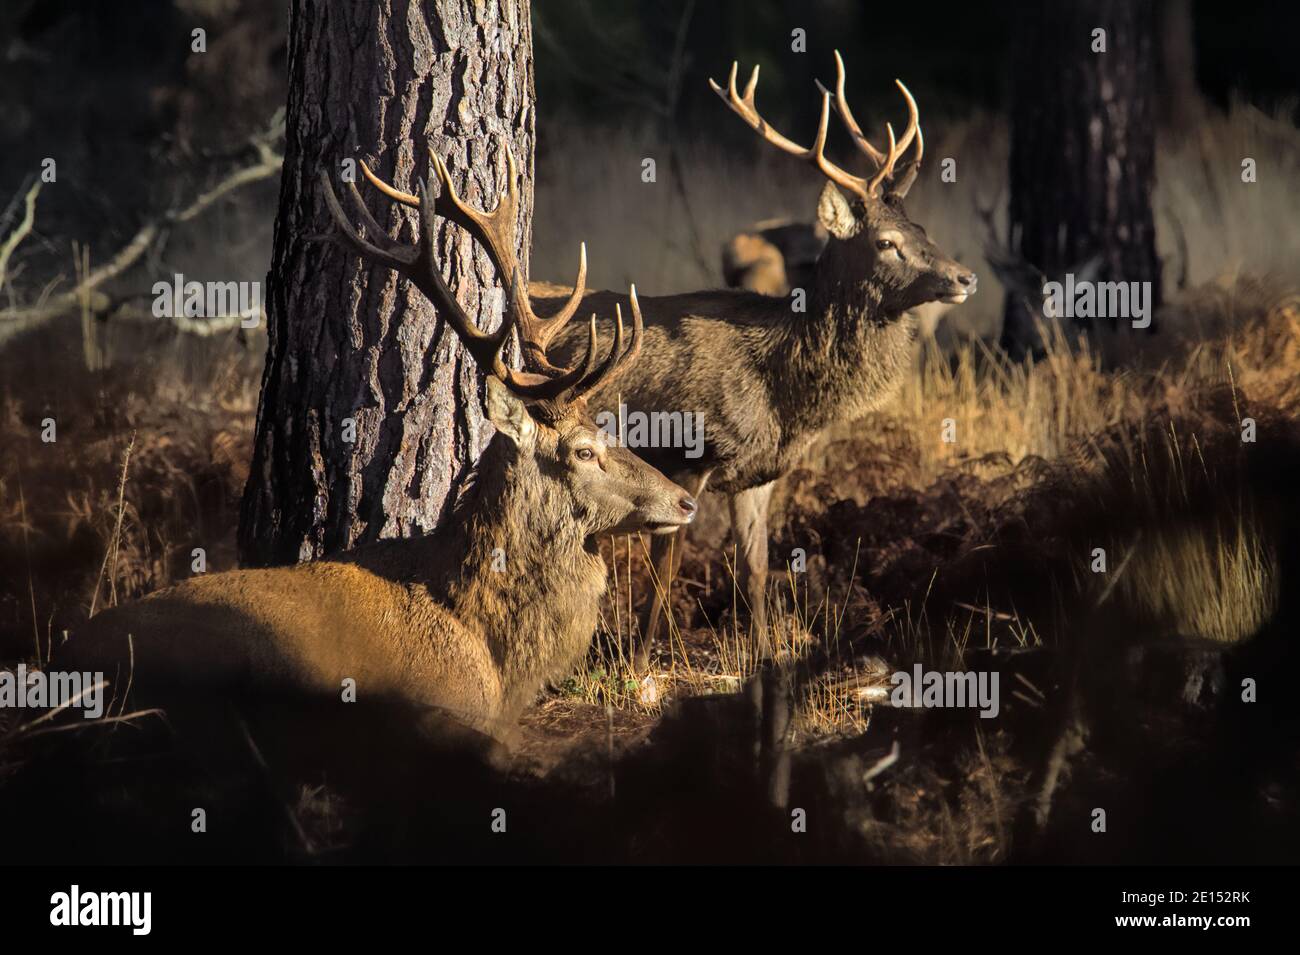 Old Male Red Deer Stag,Cervus elaphus, With Antlers Sitting Next To A Pine Tree In The Sunlight Next To A Standing Young Deer Stag With Antlers, New F Stock Photo